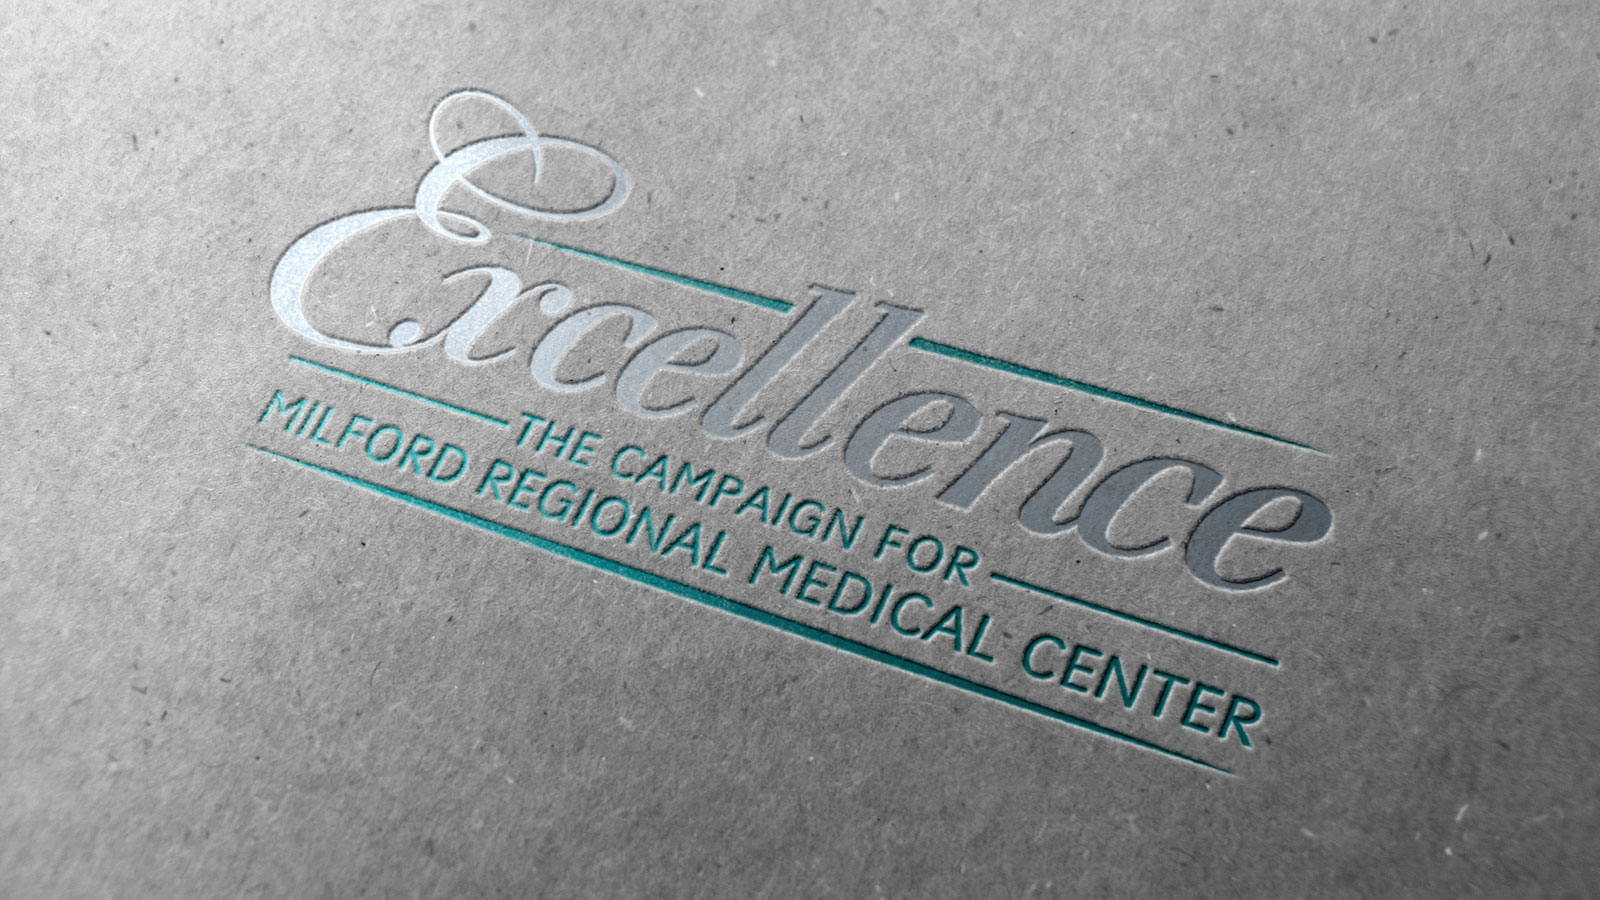 Milford Regional Hospital Excellence Campaign Logo